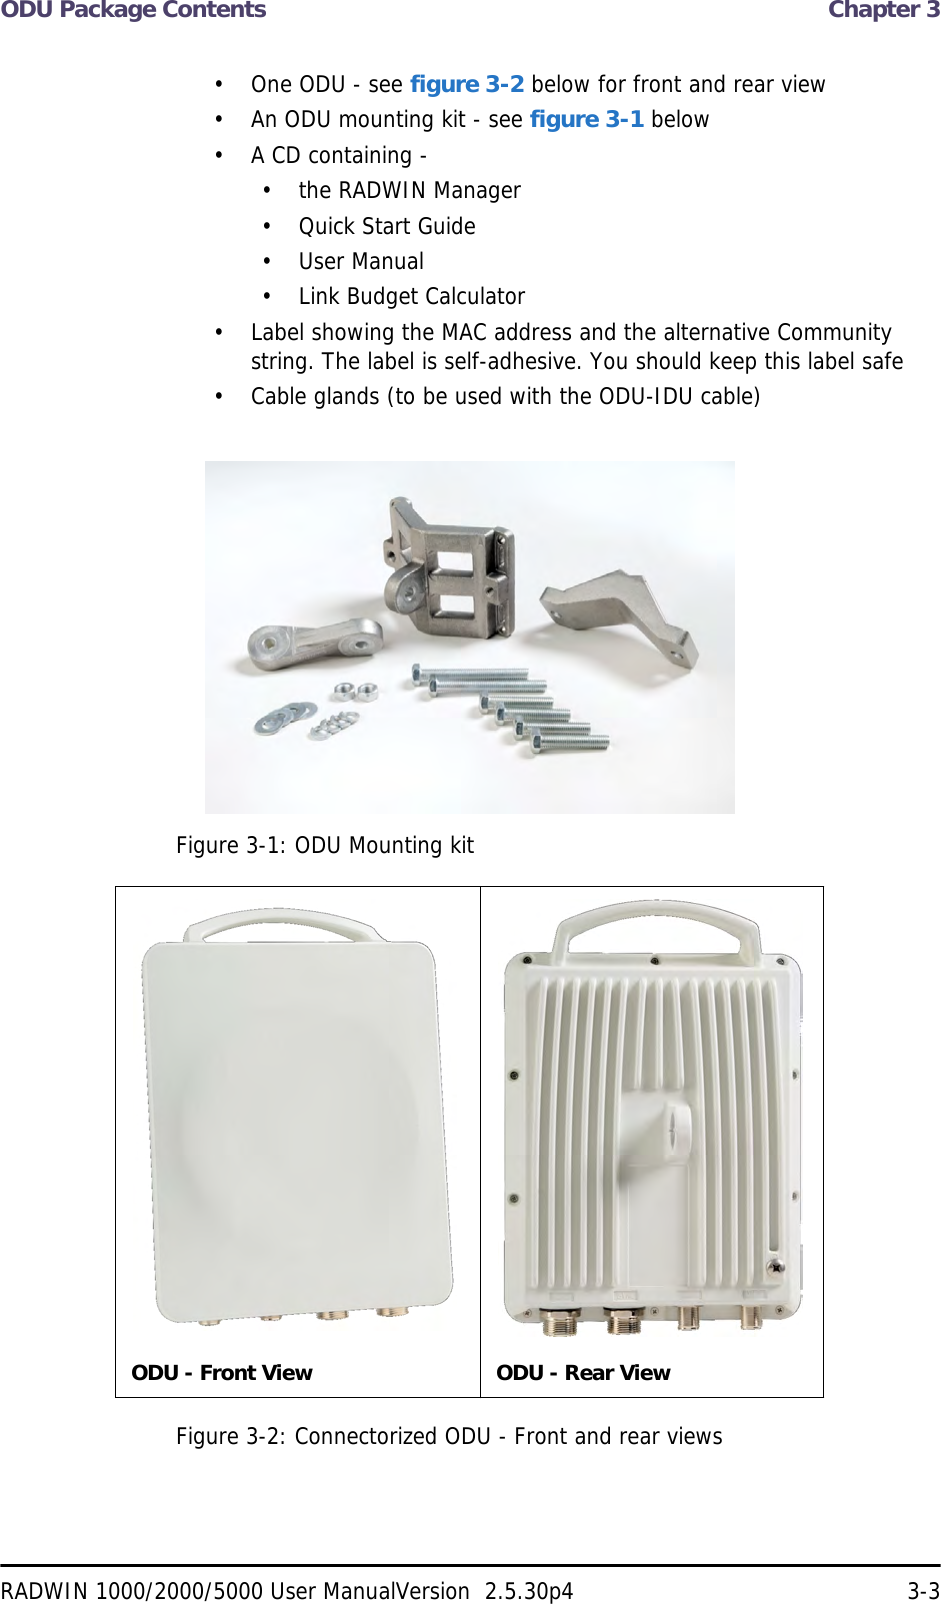 ODU Package Contents  Chapter 3RADWIN 1000/2000/5000 User ManualVersion  2.5.30p4 3-3• One ODU - see figure 3-2 below for front and rear view• An ODU mounting kit - see figure 3-1 below• A CD containing -• the RADWIN Manager• Quick Start Guide• User Manual• Link Budget Calculator• Label showing the MAC address and the alternative Community string. The label is self-adhesive. You should keep this label safe• Cable glands (to be used with the ODU-IDU cable)Figure 3-1: ODU Mounting kitFigure 3-2: Connectorized ODU - Front and rear viewsODU - Front View ODU - Rear View